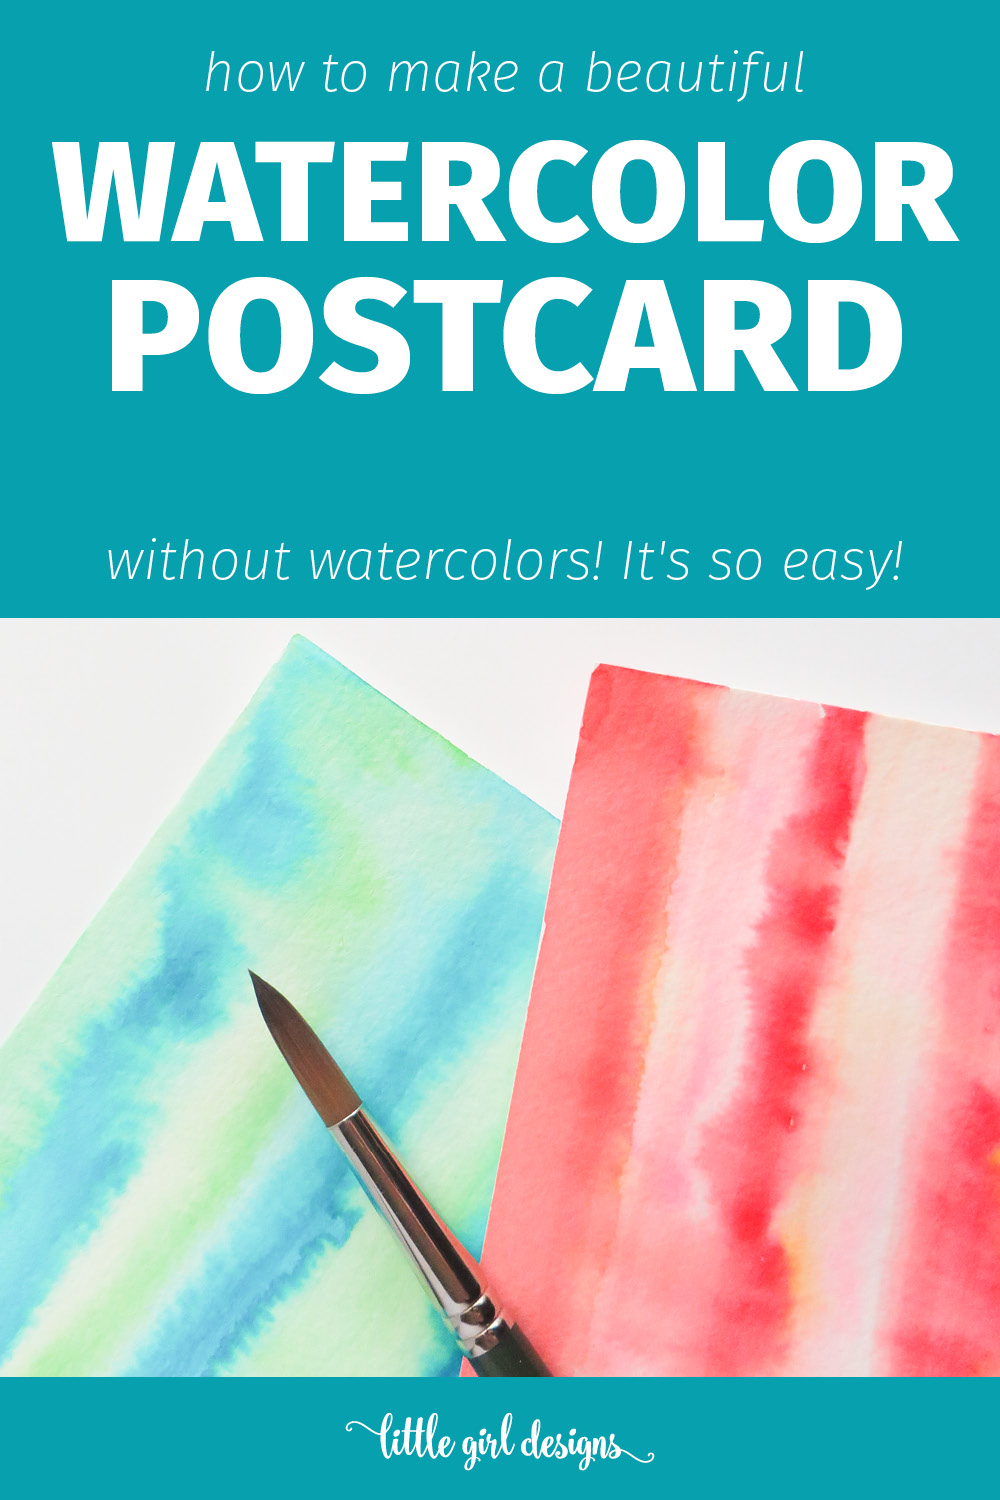 Make a Watercolor Postcard . . . Without Watercolors!